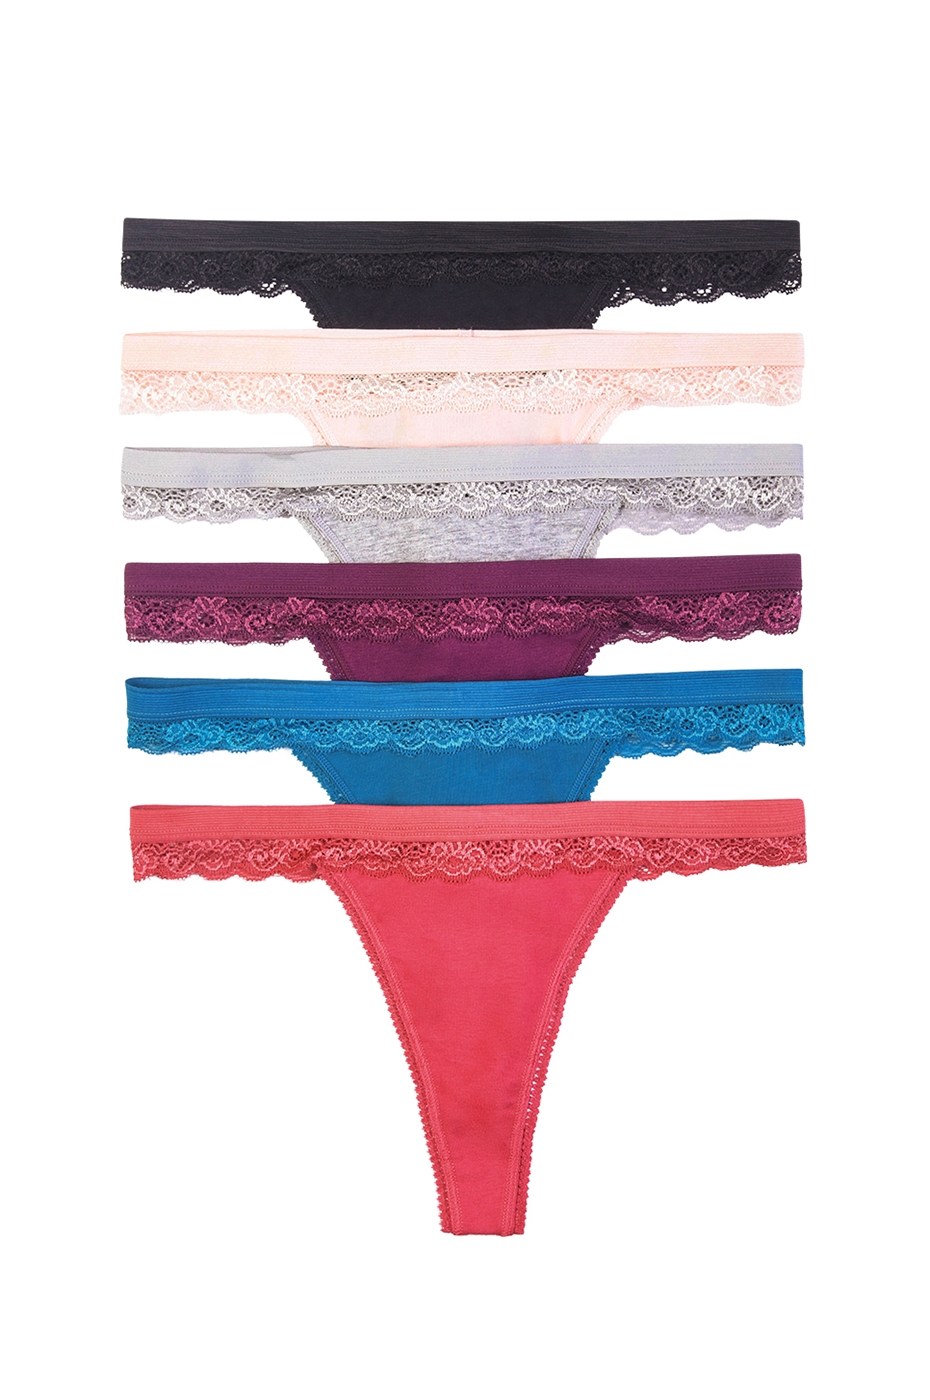 6 Pack of Lace Thong Panties Sexy Underwear Several Colors and Patterns |  eBay